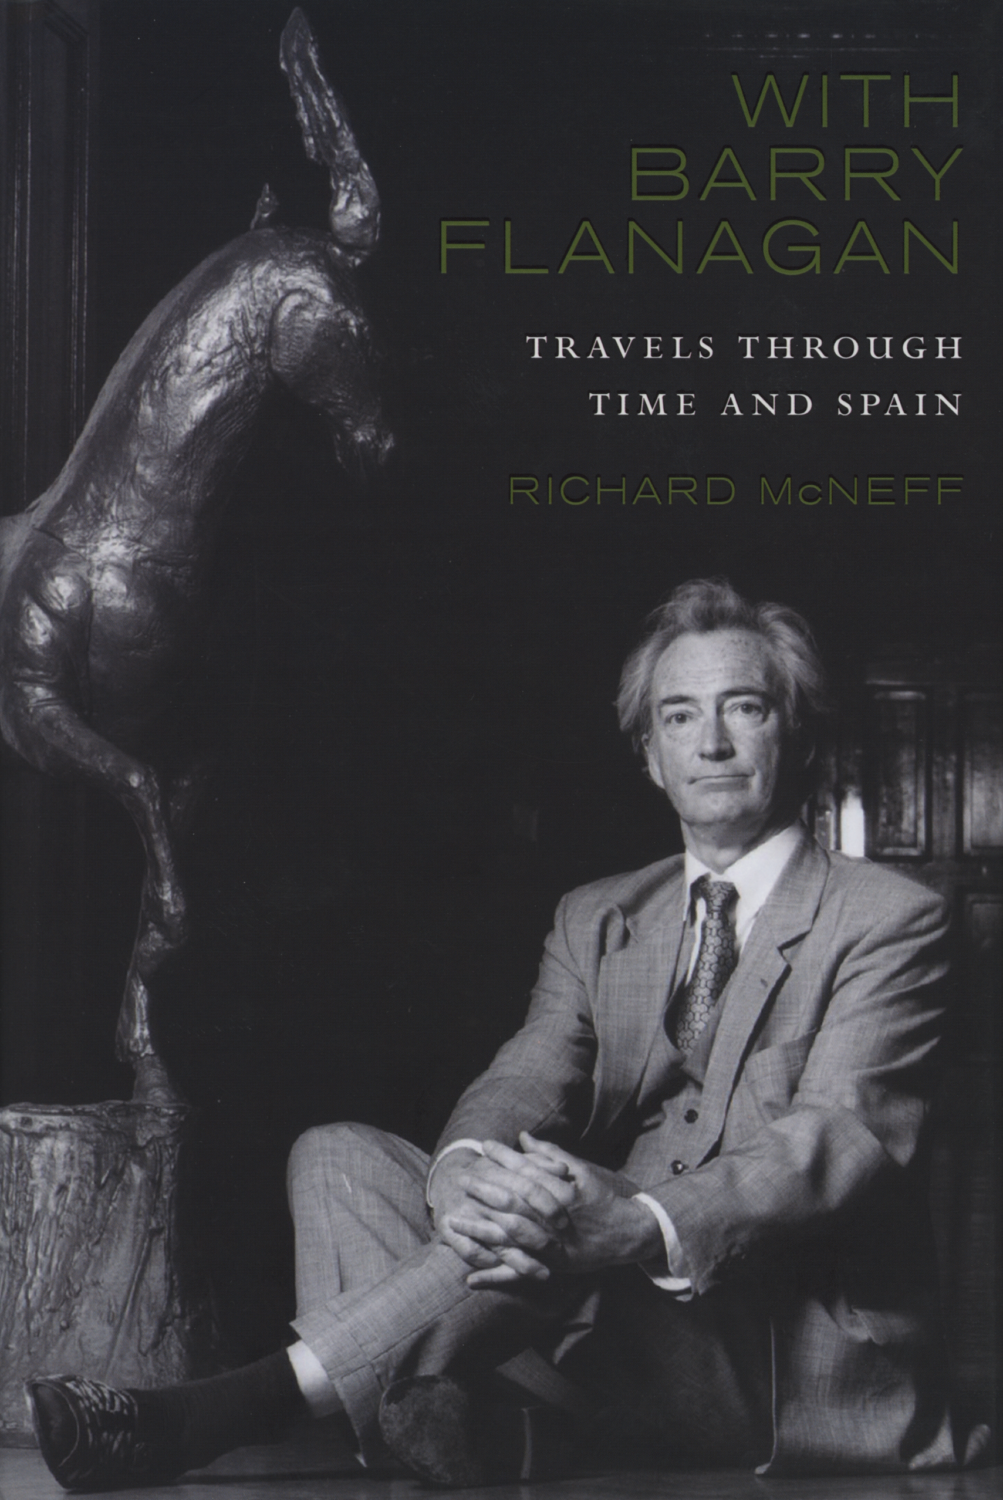 With Barry Flanagan, Travels Through Time and Spain